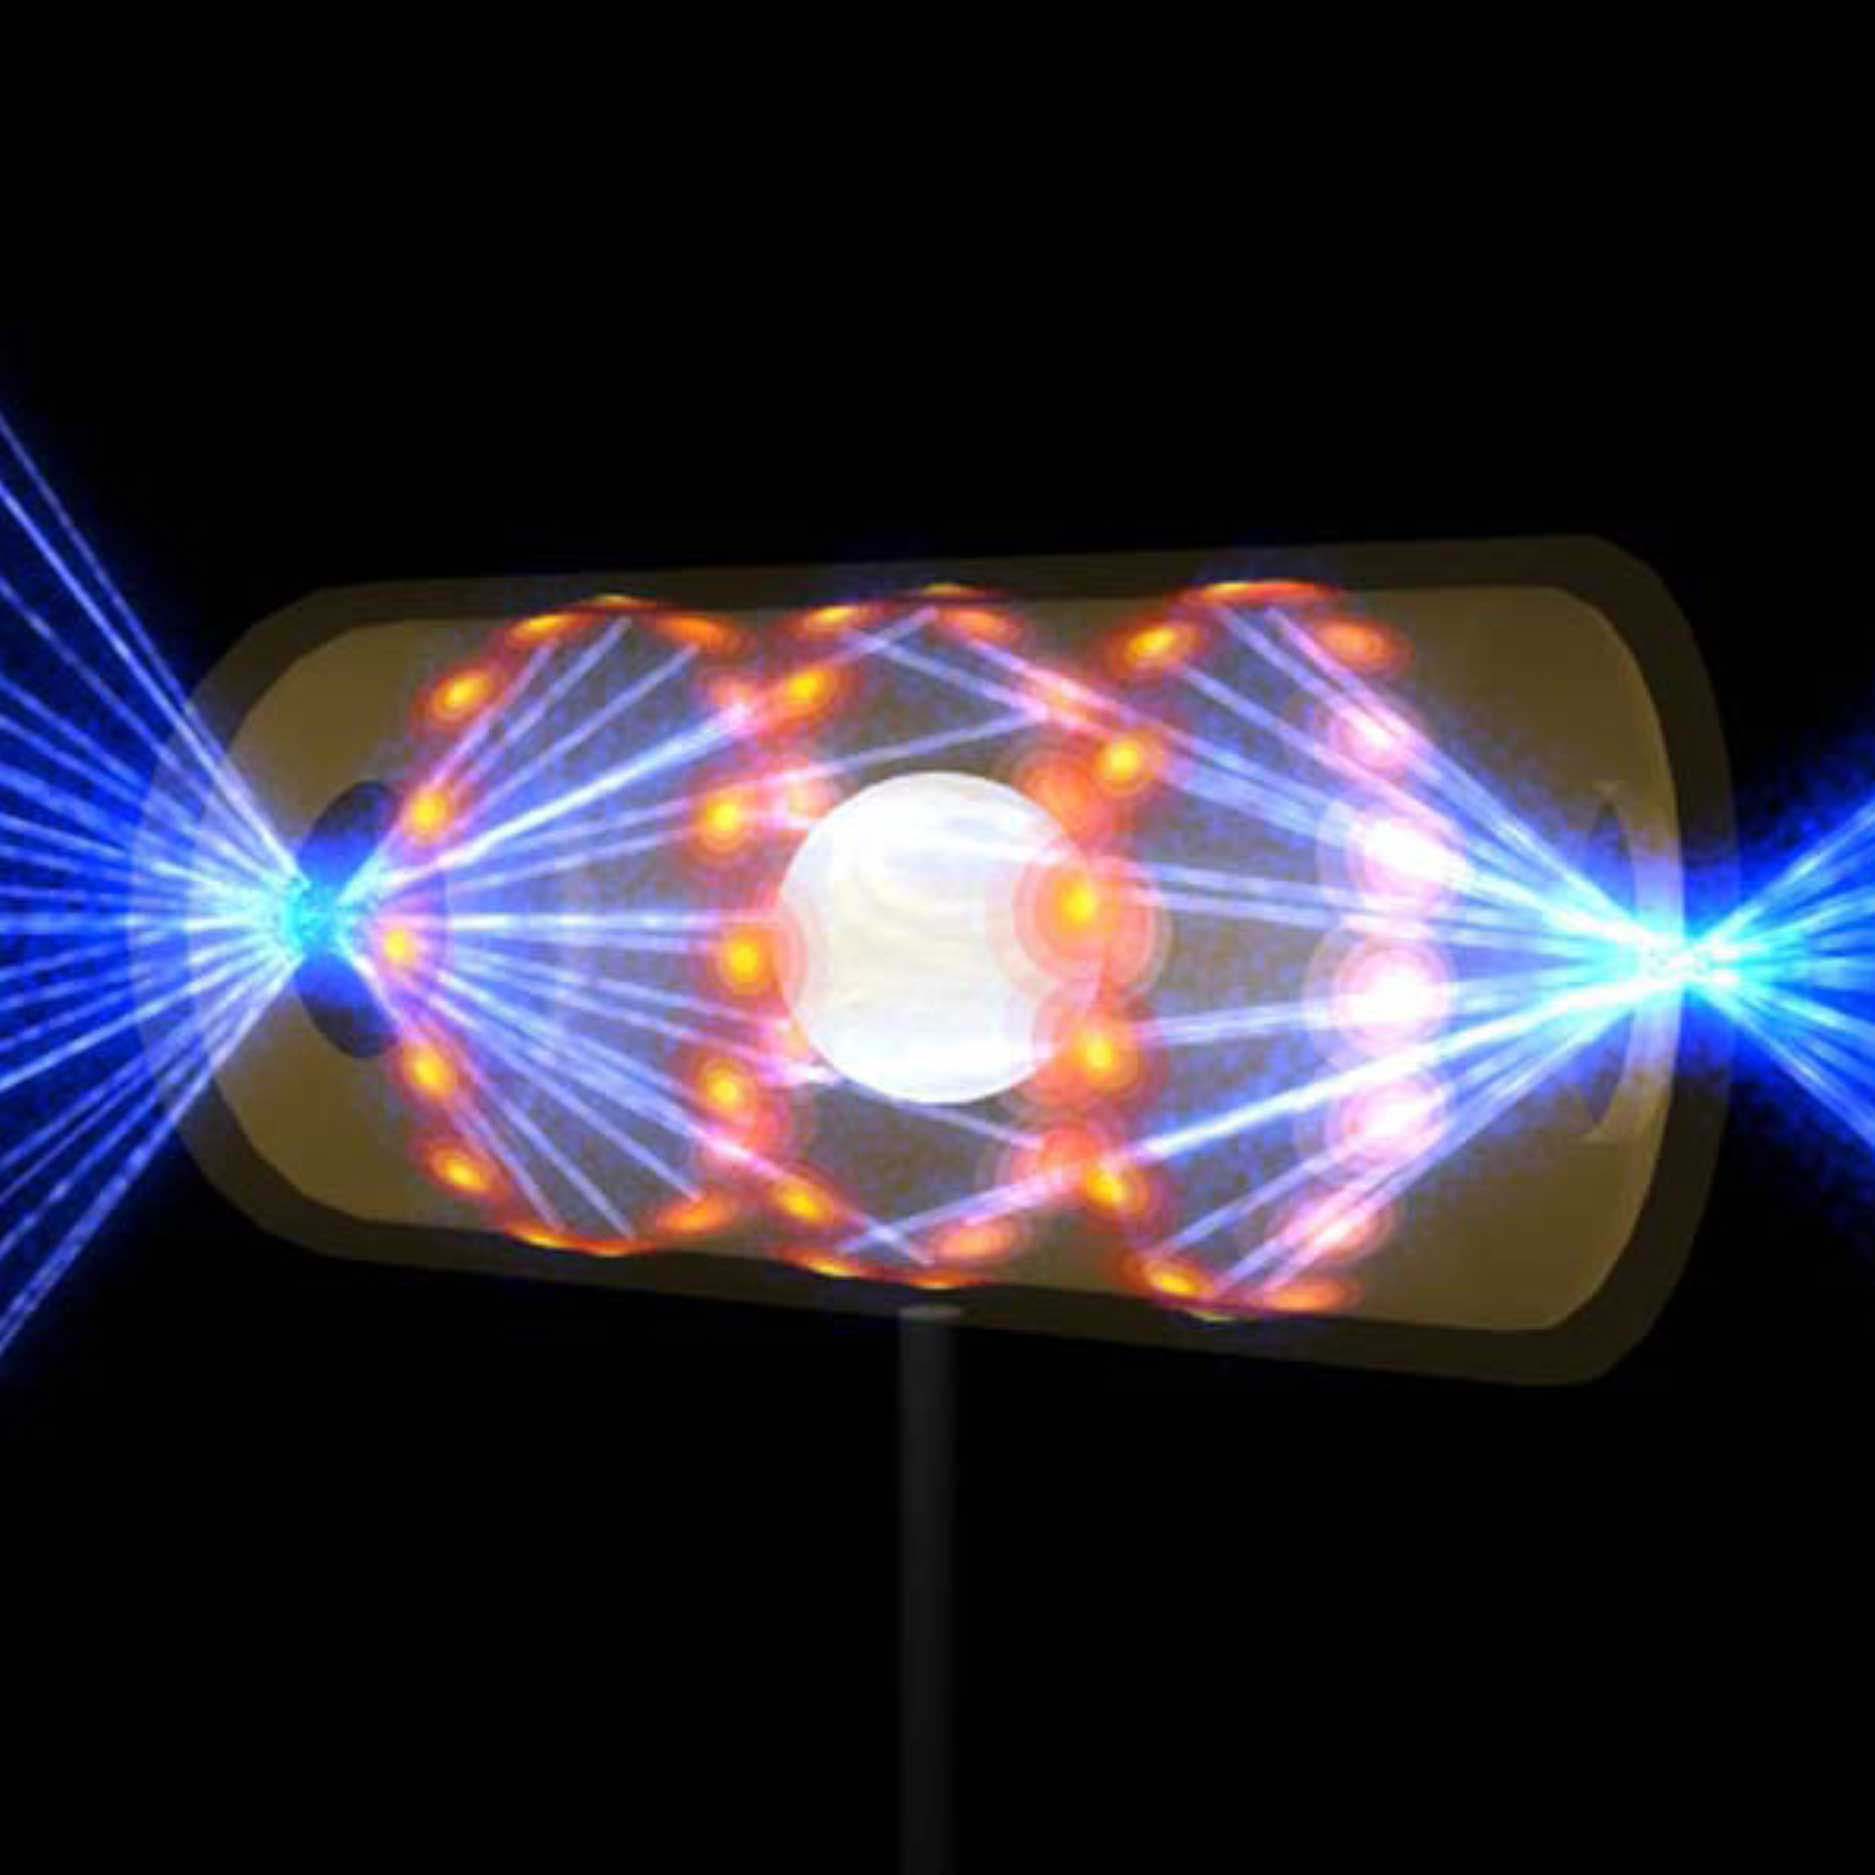 Rendering of the Nuclear Fusion Process